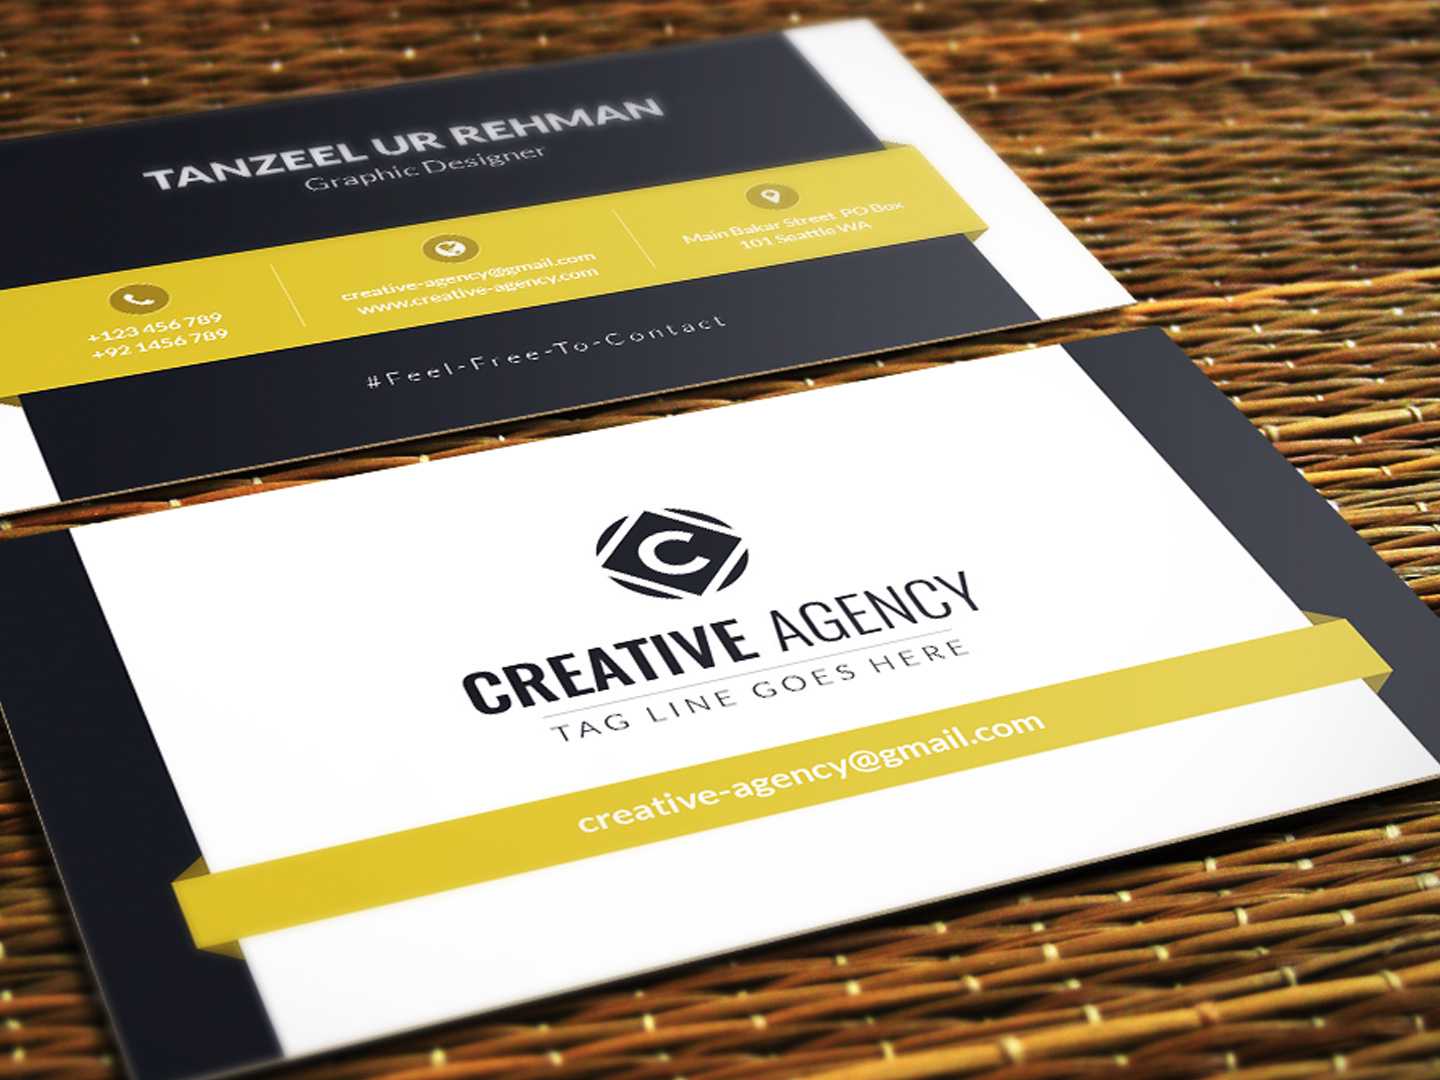 Business Cards Template - Free Downloadtanzeel Ur Rehman Pertaining To Templates For Visiting Cards Free Downloads